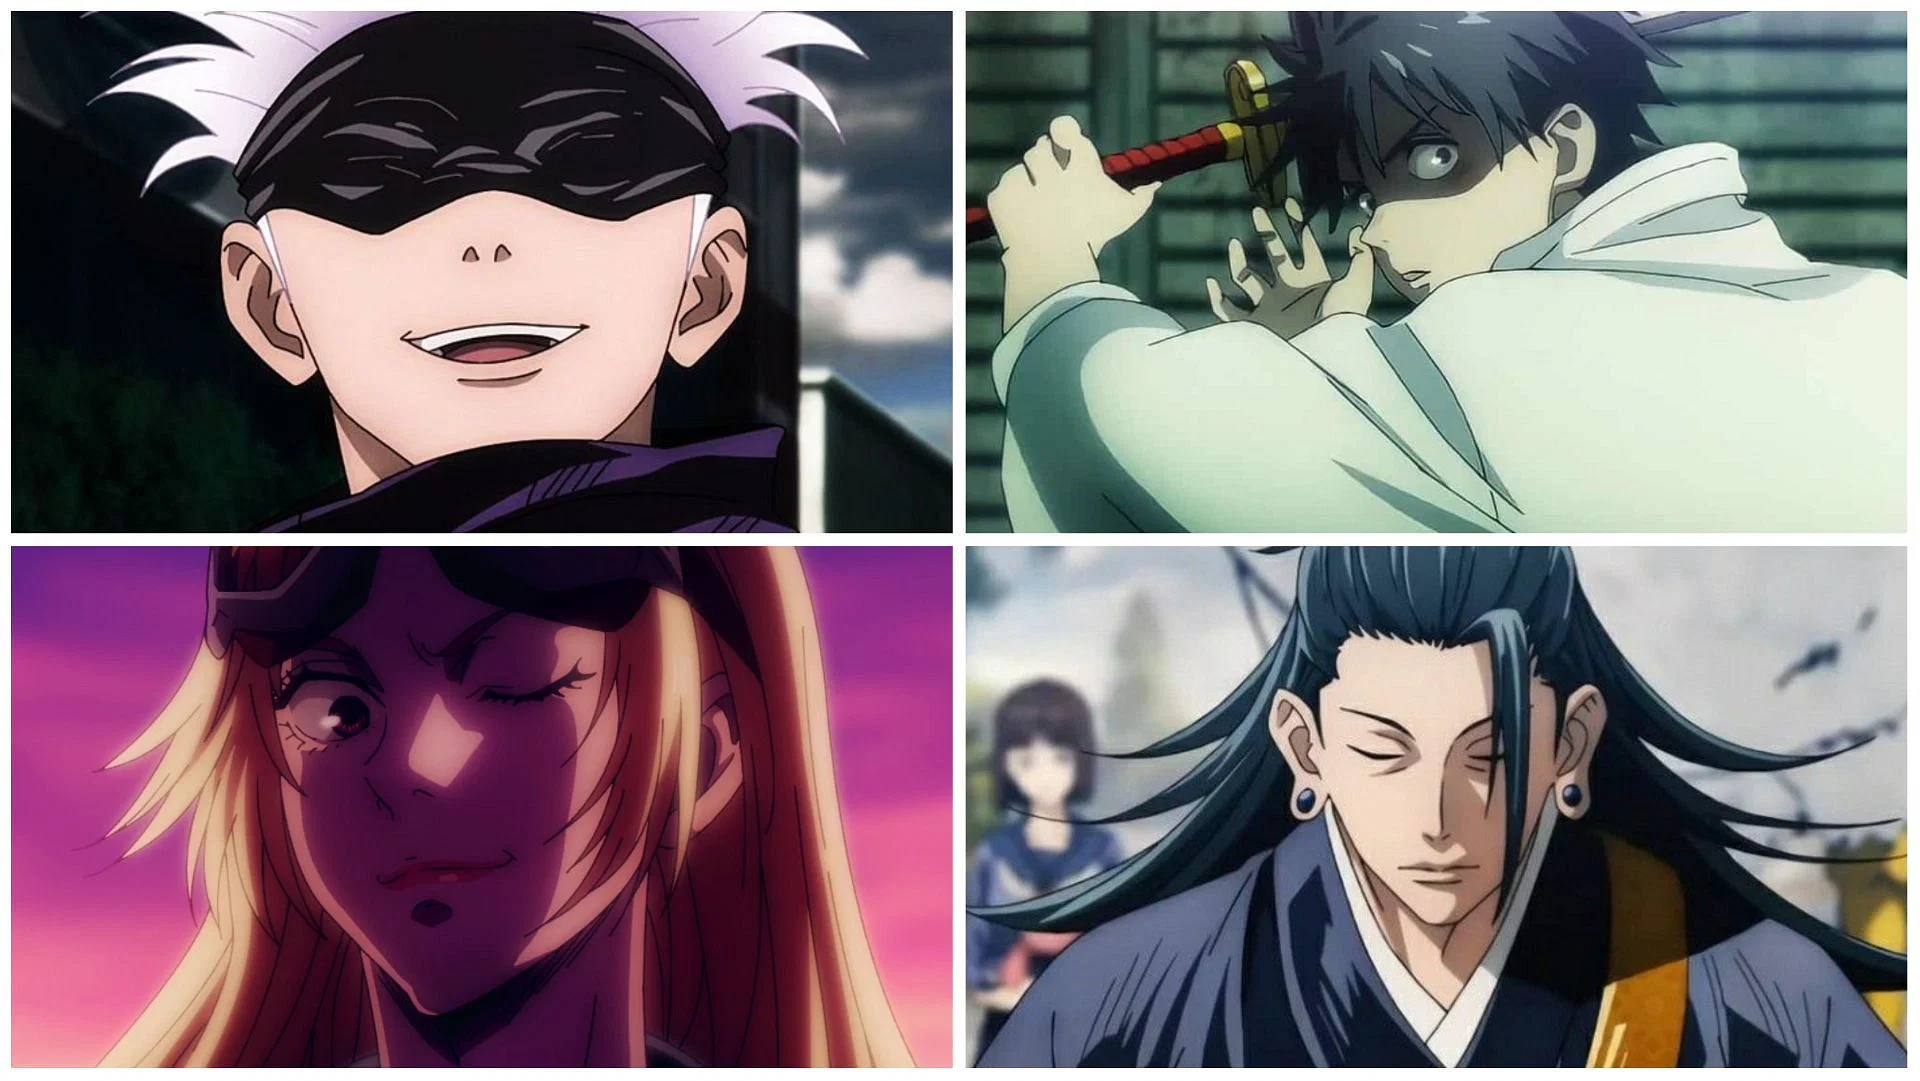 Comparing Demon Slayer Characters: Who Would Be Sorcerers in Jujutsu Kaisen?